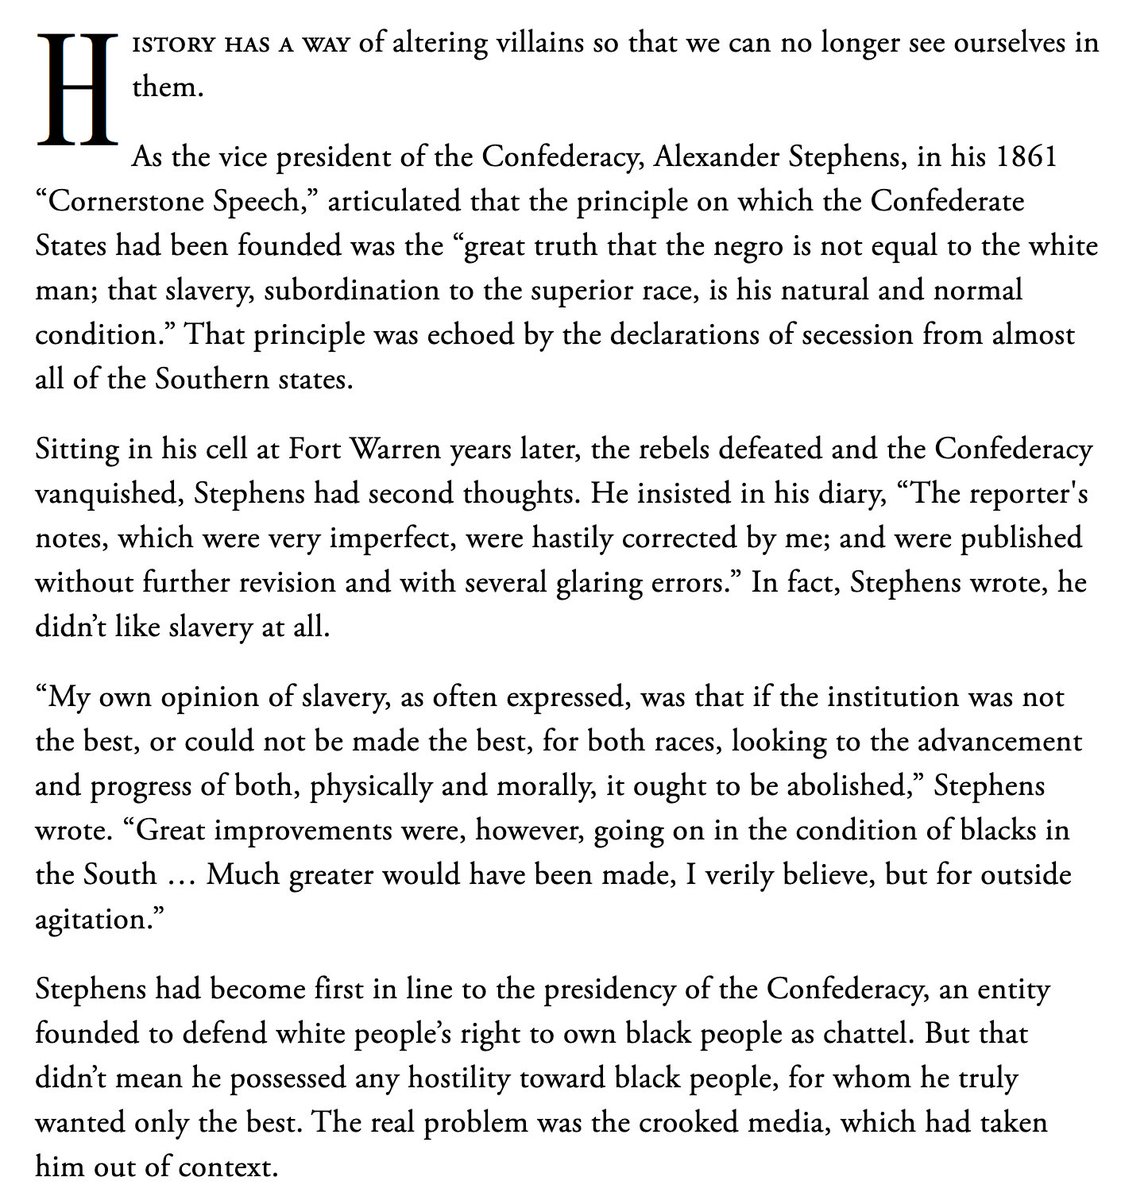 63. In The Nationalist’s Delusion, Serwer brought up Confederate Vice President Alexander Stephens, who delivered the infamous Cornerstone Speech justifying slavery and the subordination of Black people in the Confederacy. Post-war though, he rewrote why the South rebelled.